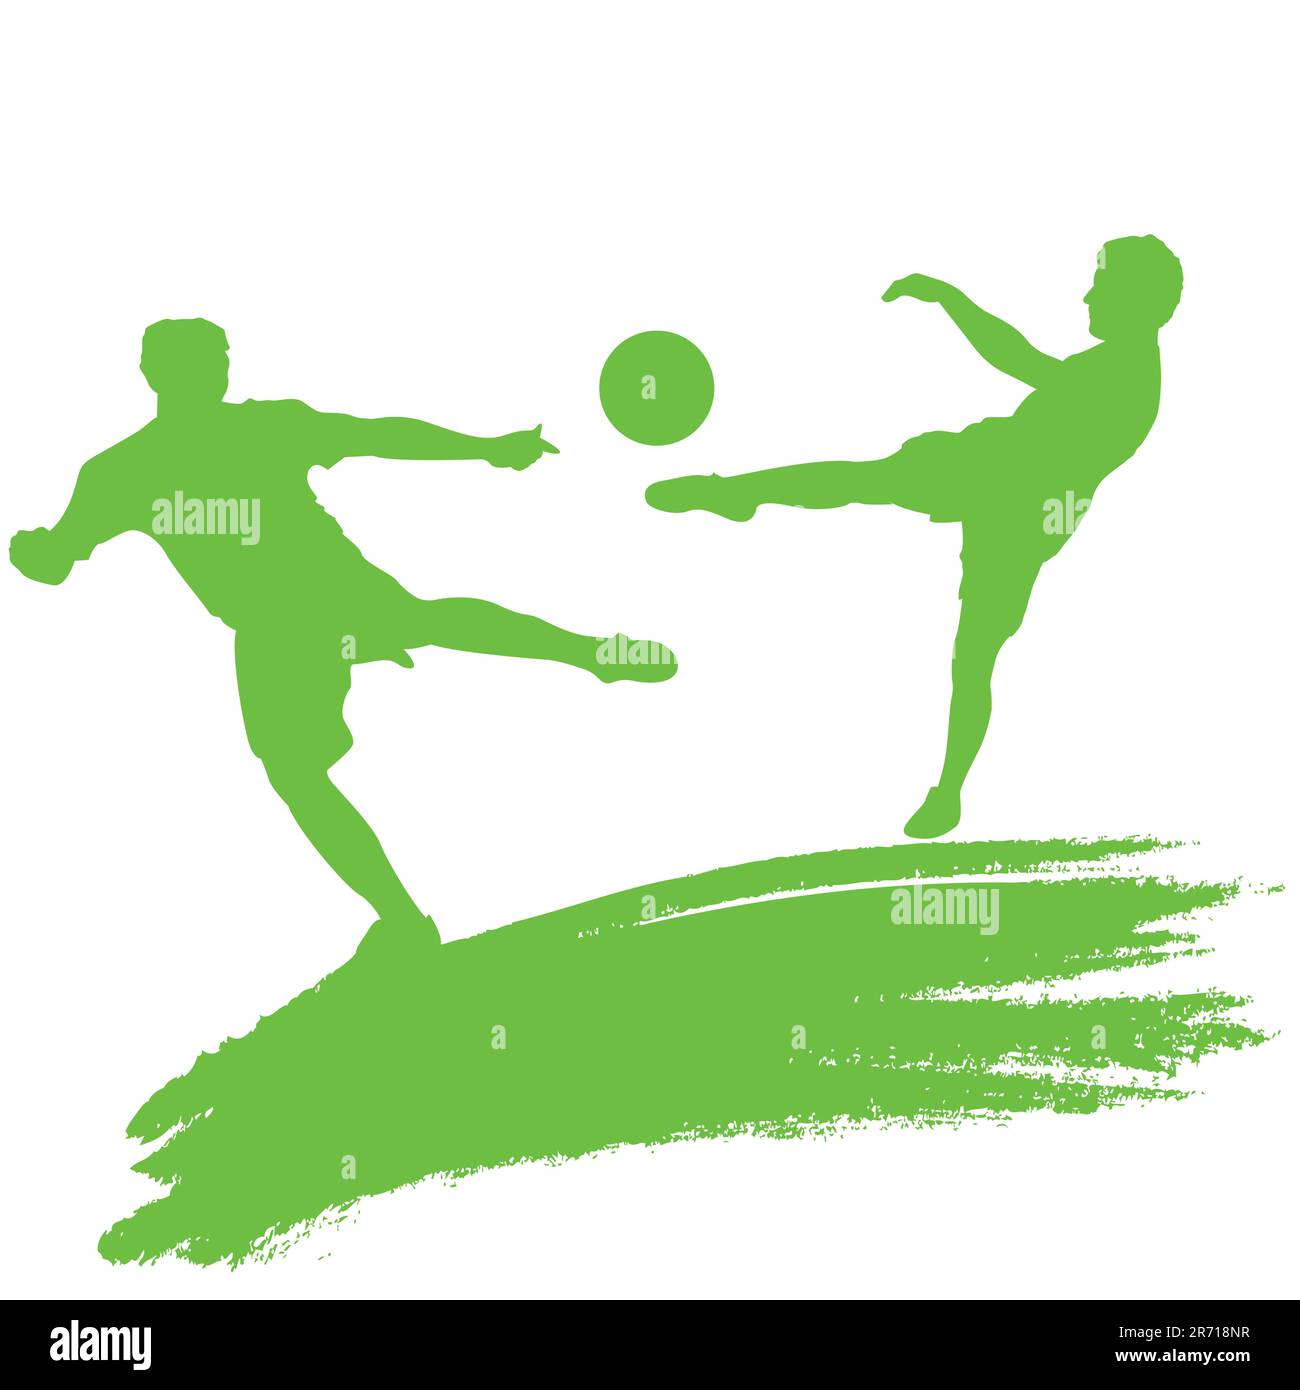 Premium Vector  Abstract silhouette art of male soccer player dribbling a  ball